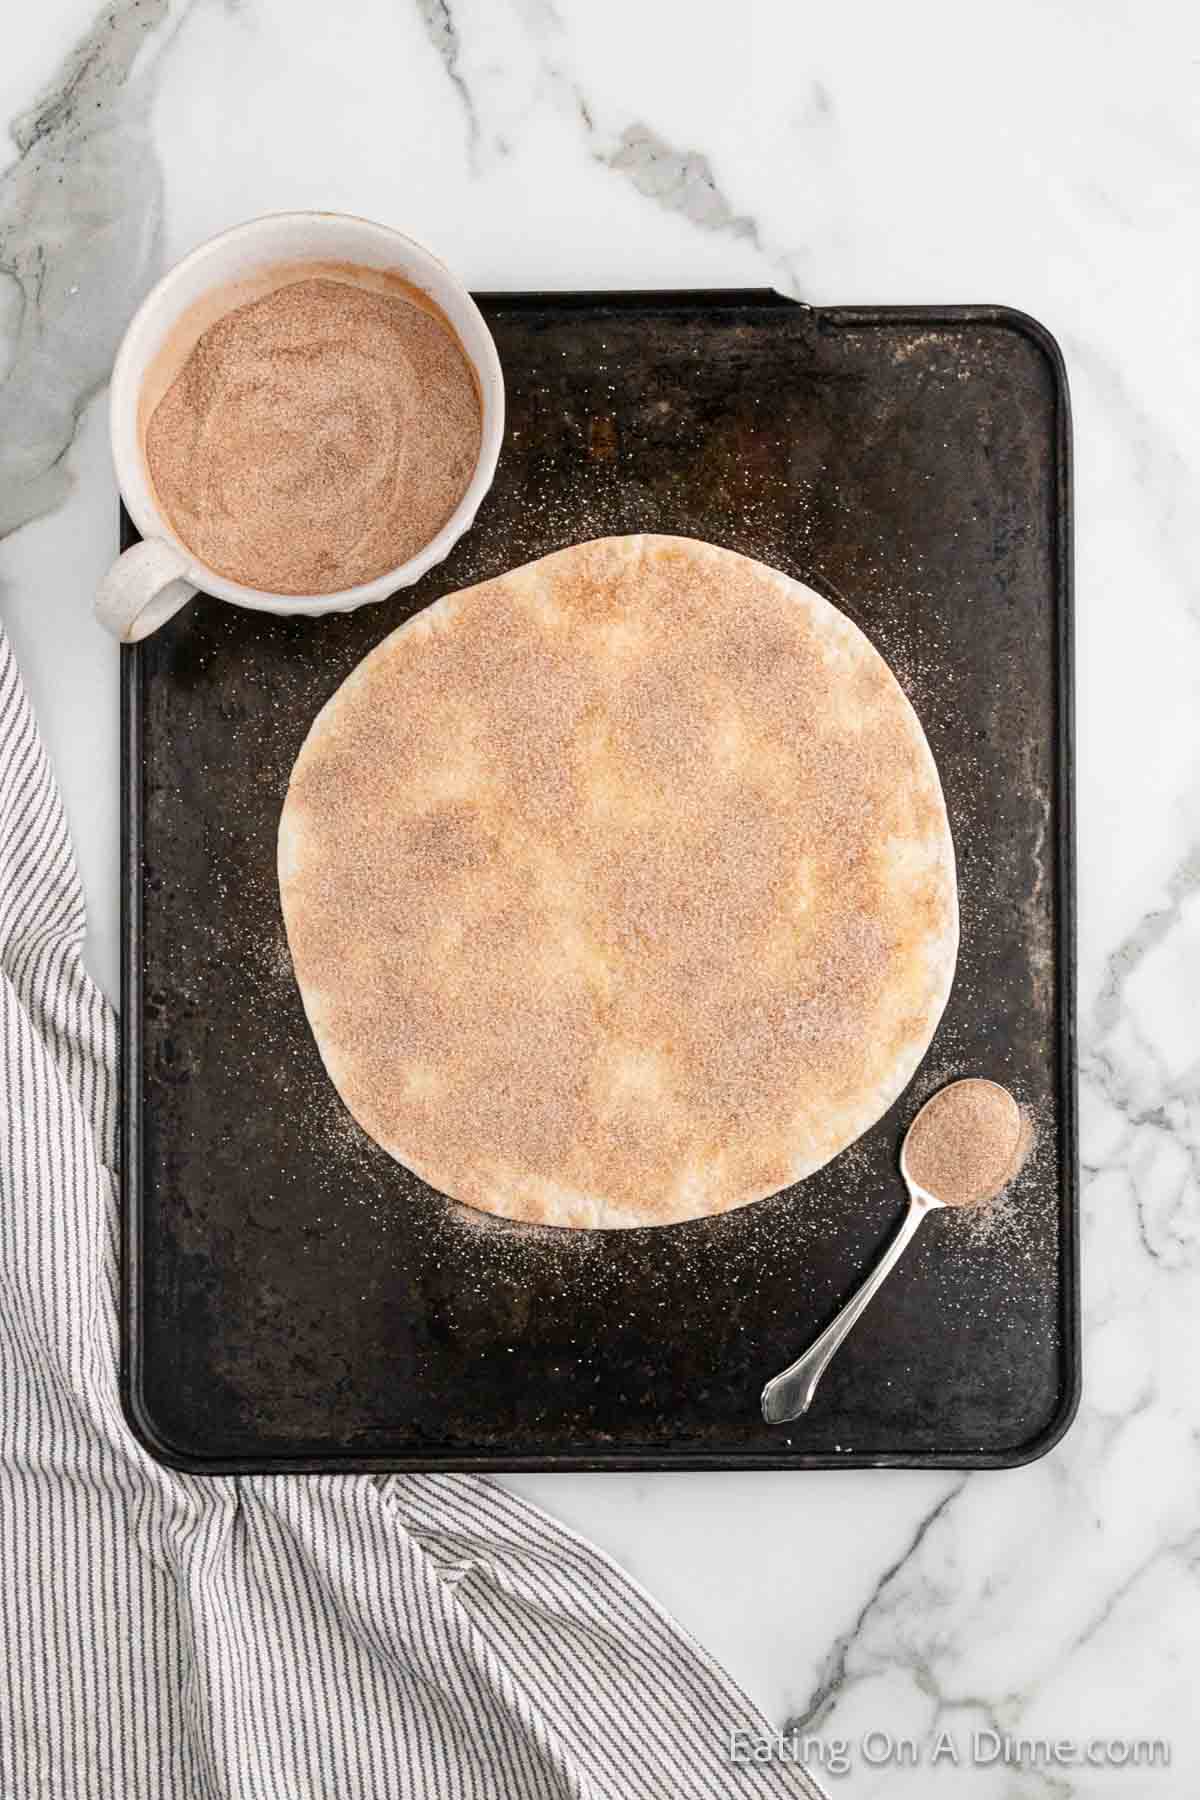 Tortilla topped with cinnamon and sugar mixture